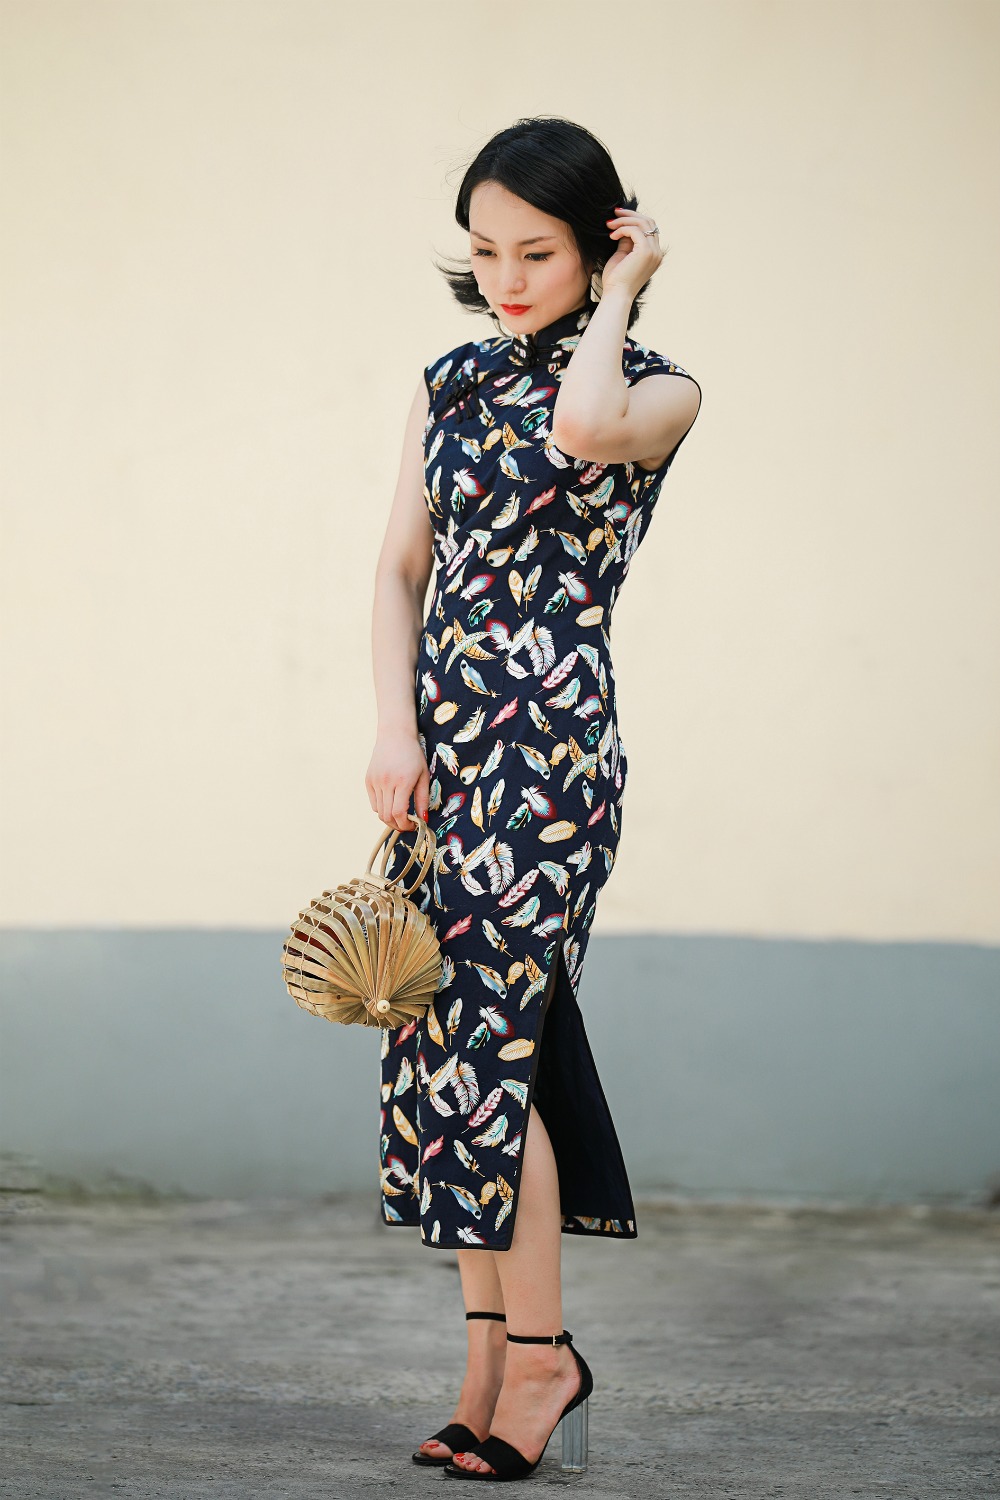 Cotton sleeveless navy feather print qipao full front view with bamboo bag